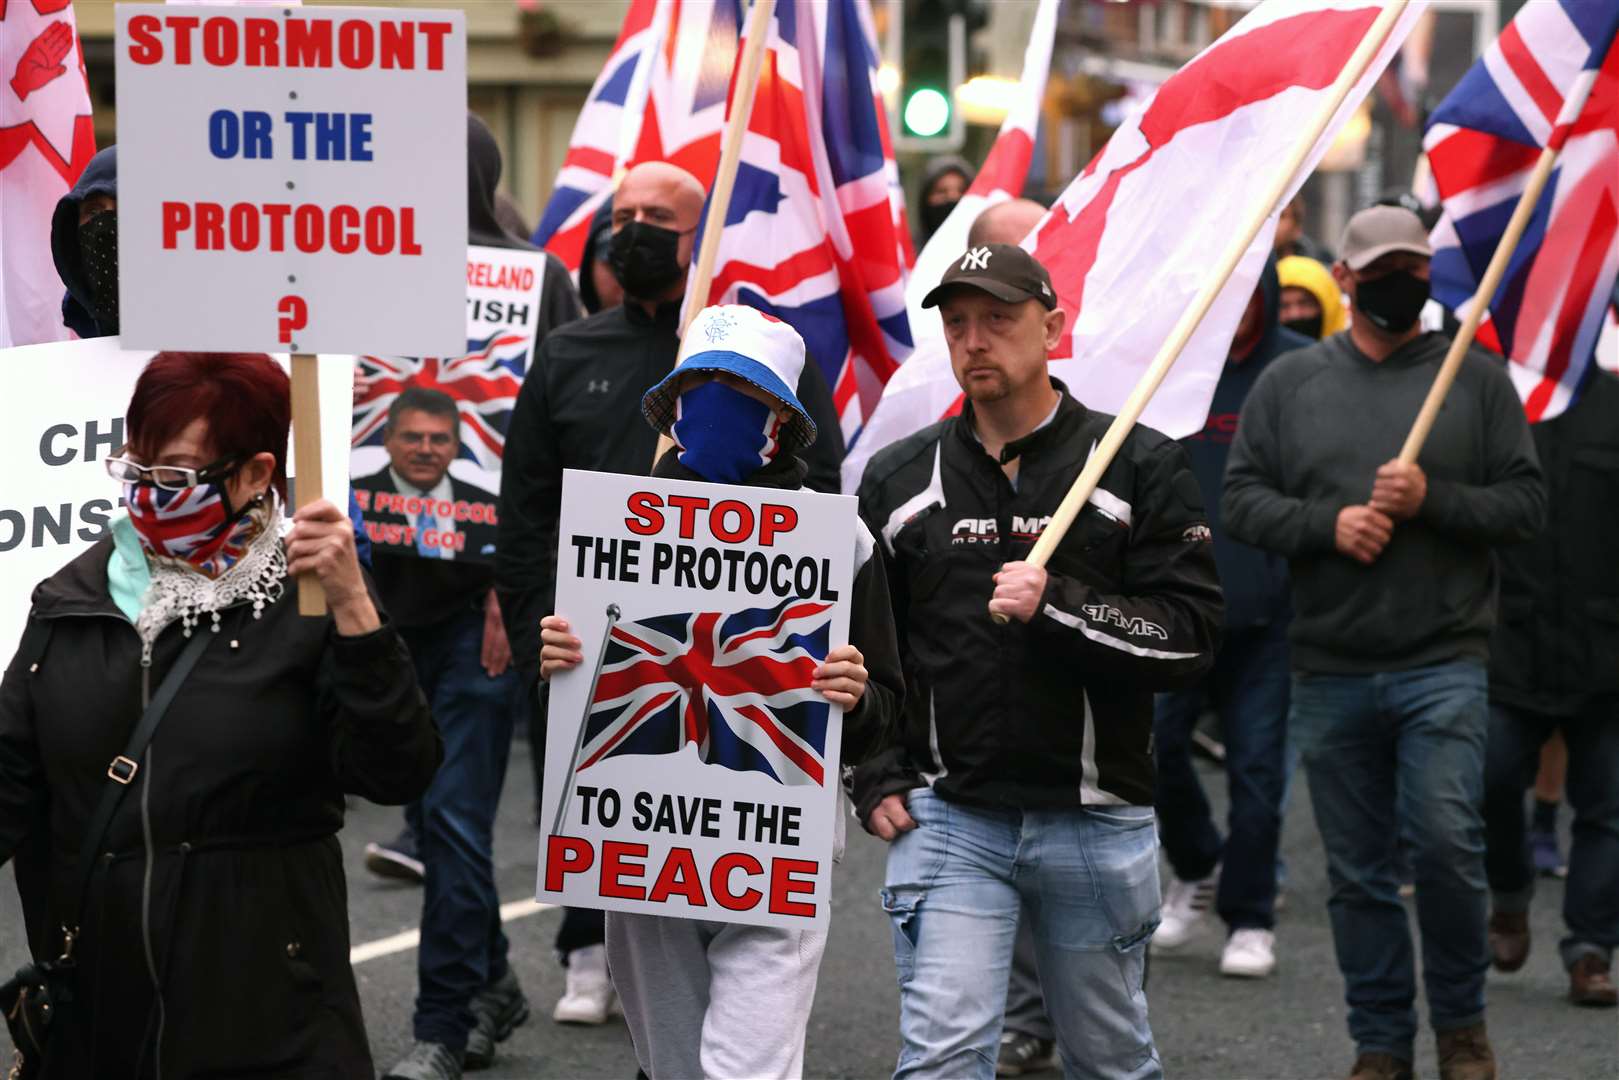 Loyalists claim the protocol has cut Northern Ireland off from the rest of the UK (Peter Morrison/PA)